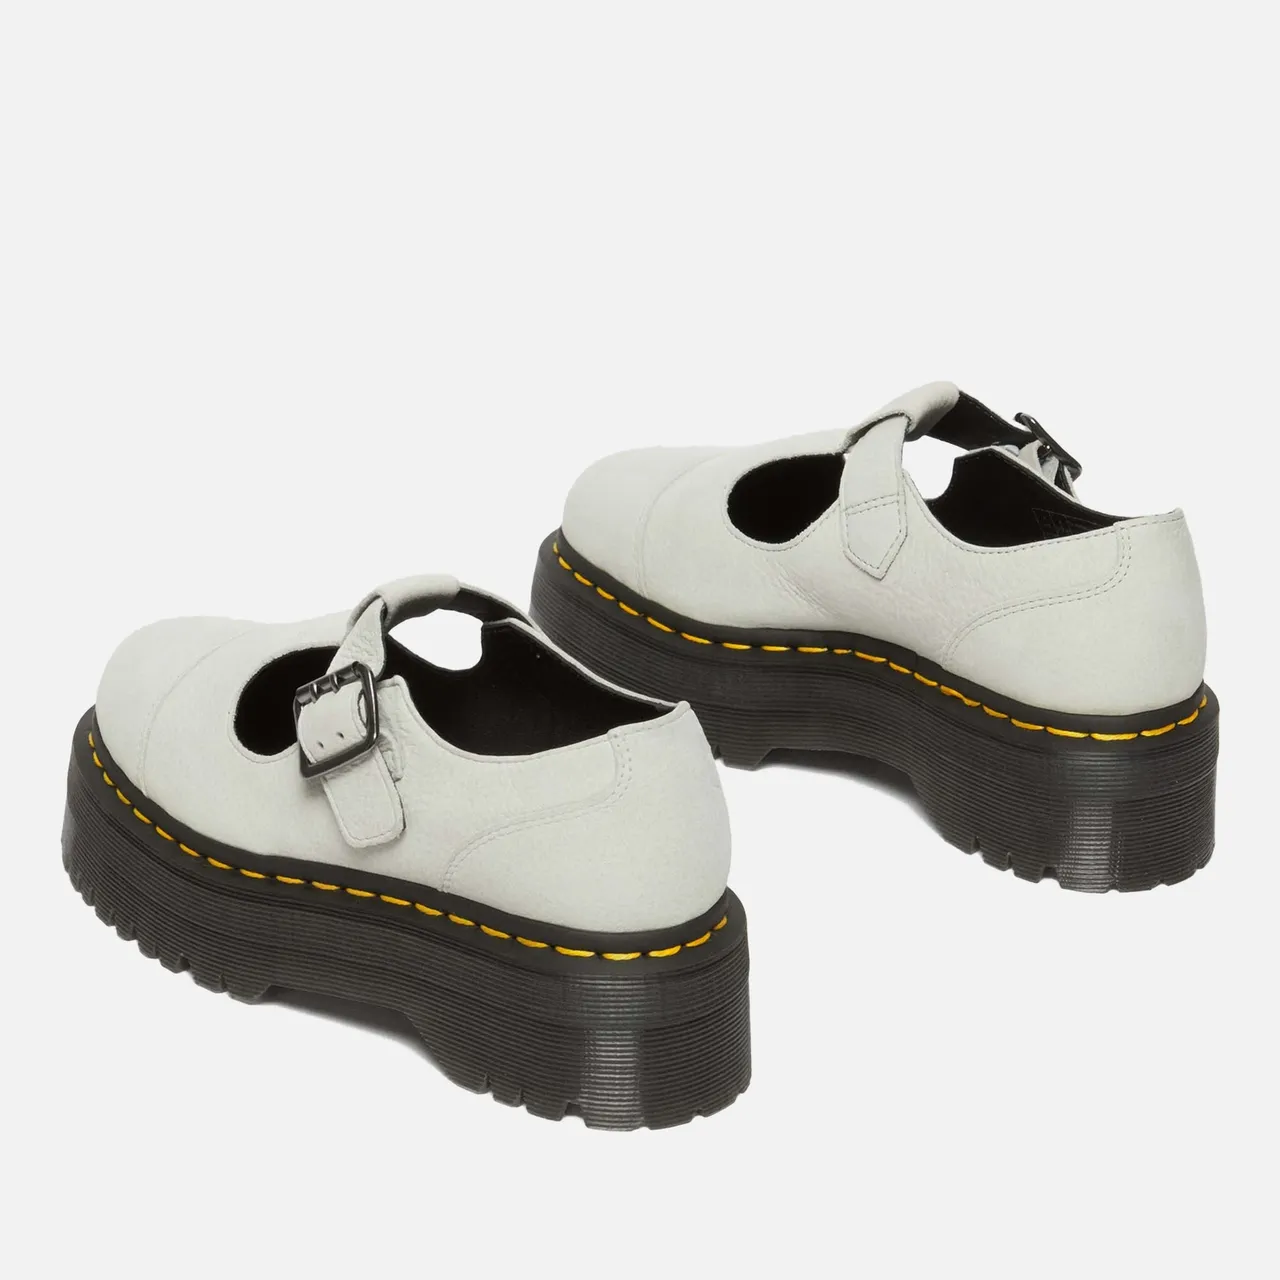 Dr. Martens Women's Bethan Leather Mary-Jane Shoes